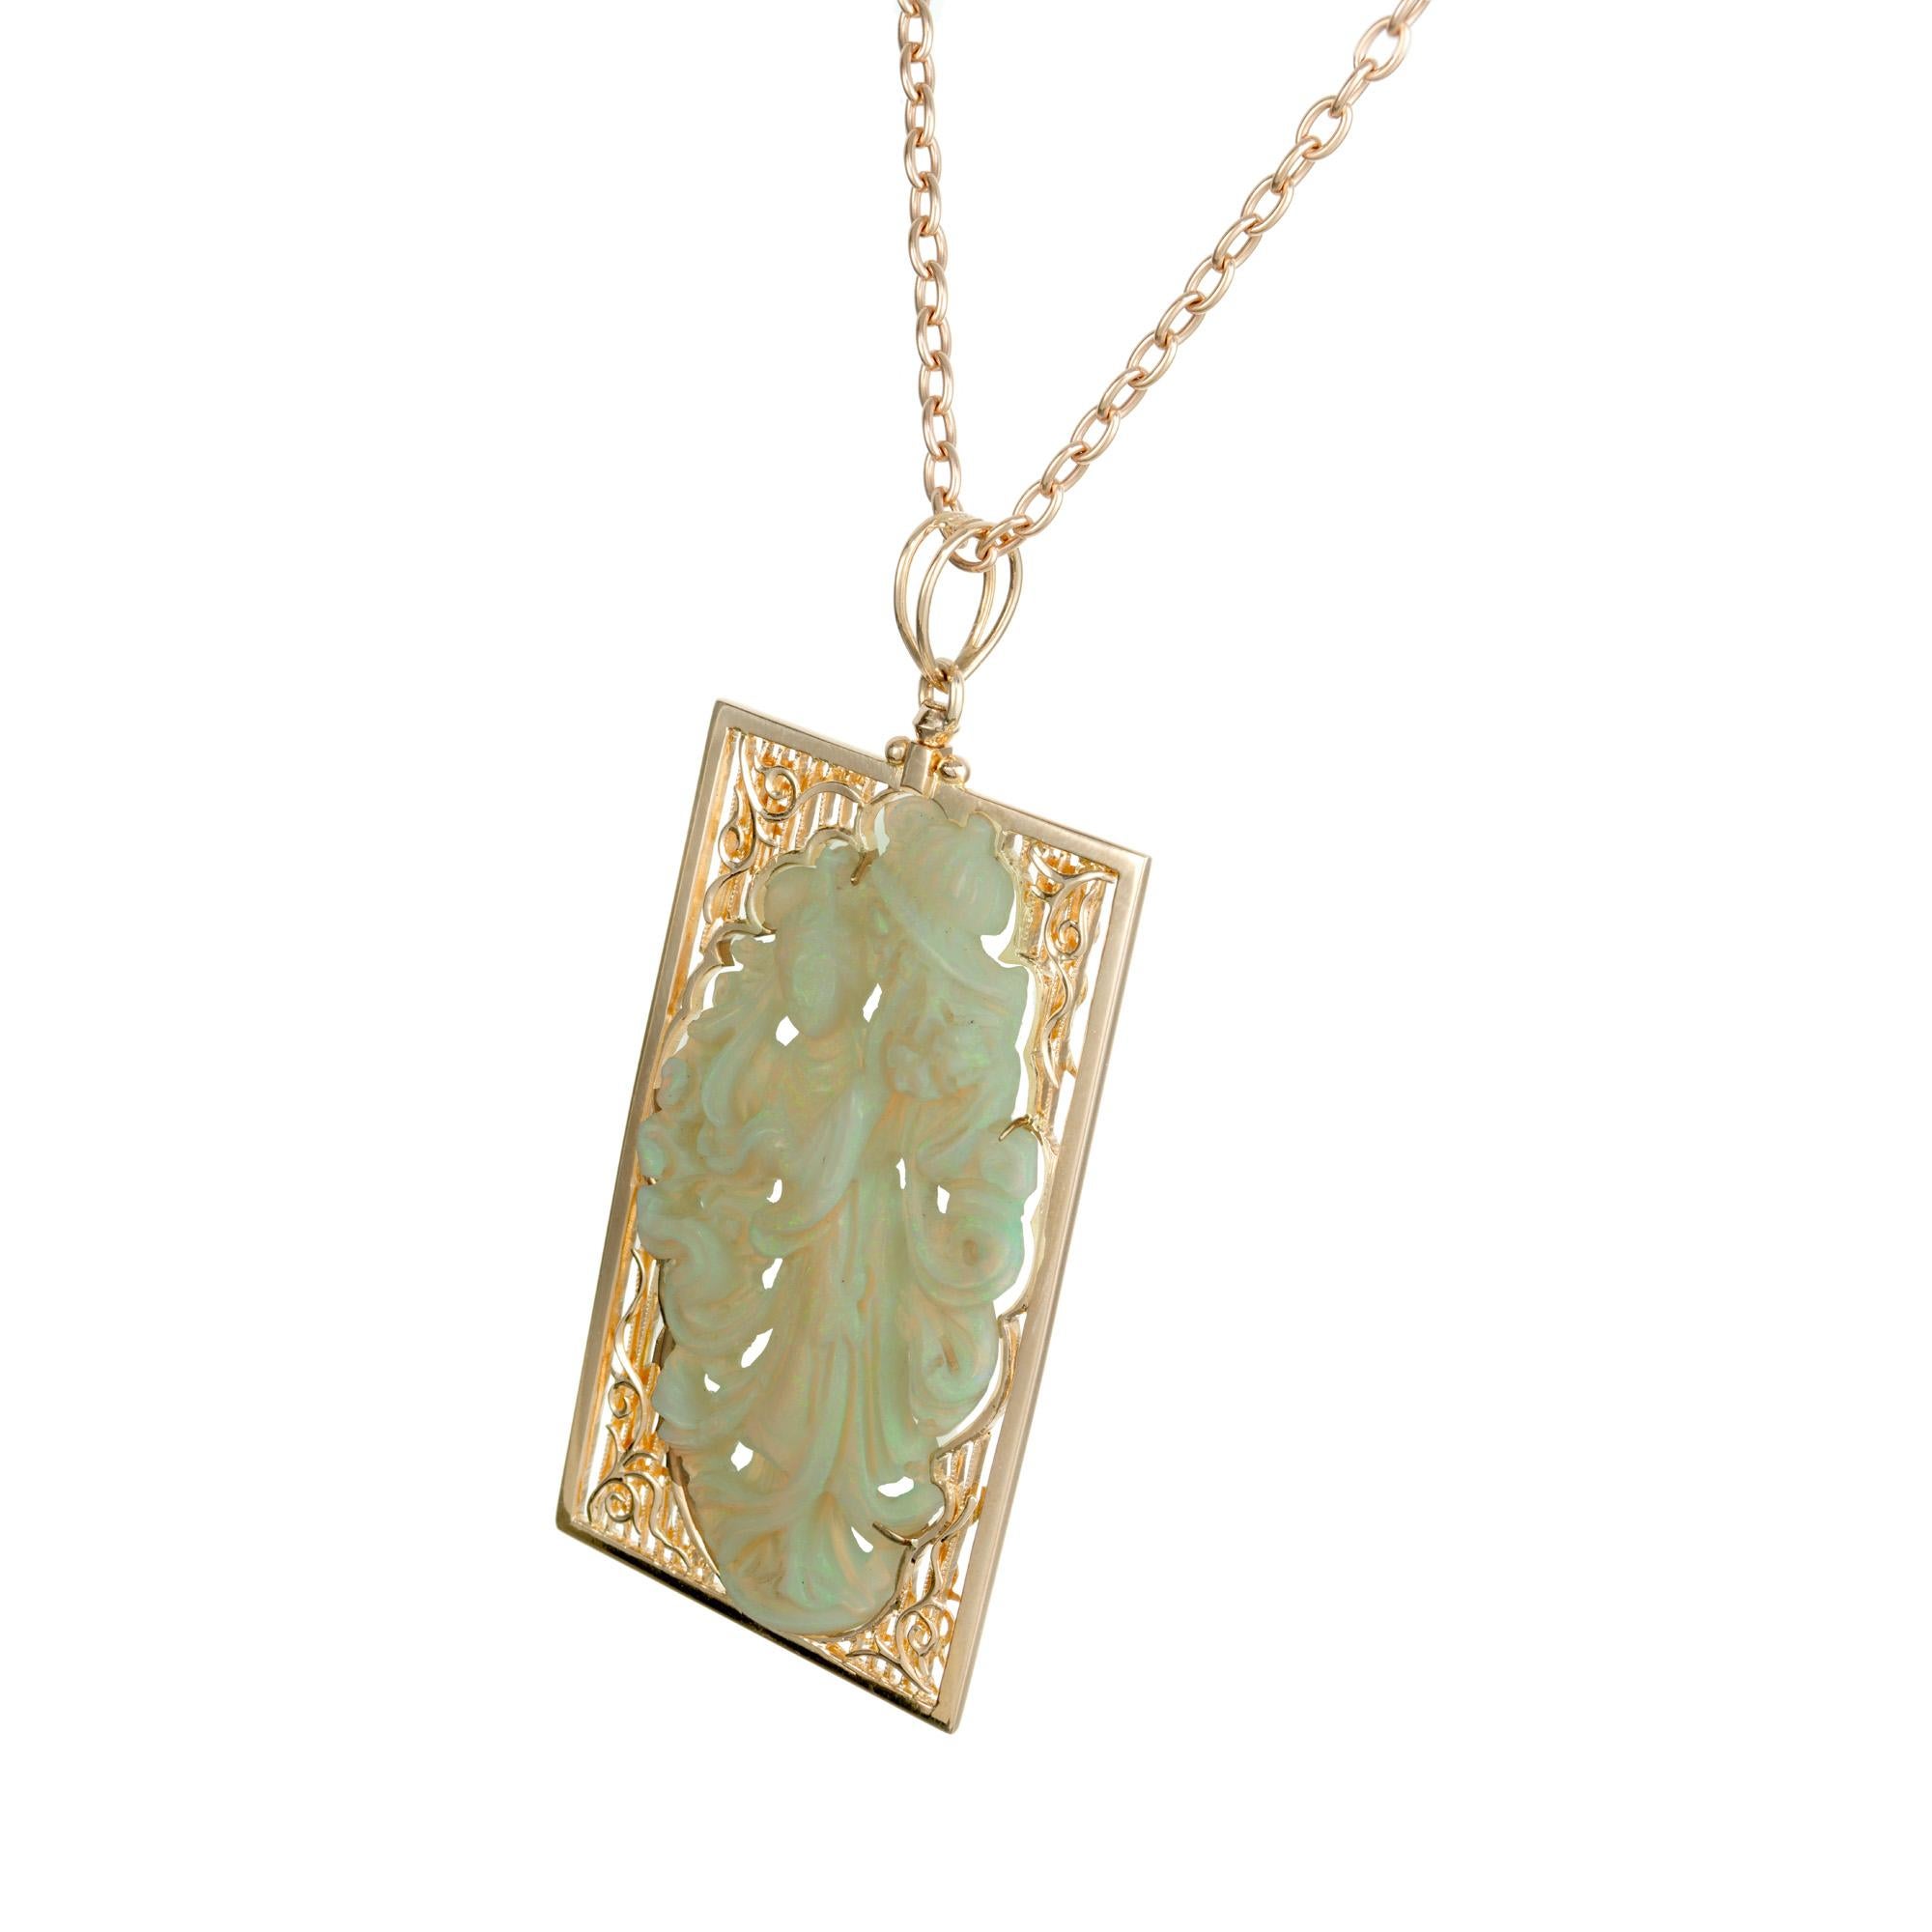 Hand carved opal pendant and necklace. Intricate blue green opal carvings of a woman in flowing robe framed in a 14k rose gold setting. The opal is carved from Coober Pedy Australian natural opal, mined from 1960-1970. 16 inch 14k rose gold chain.